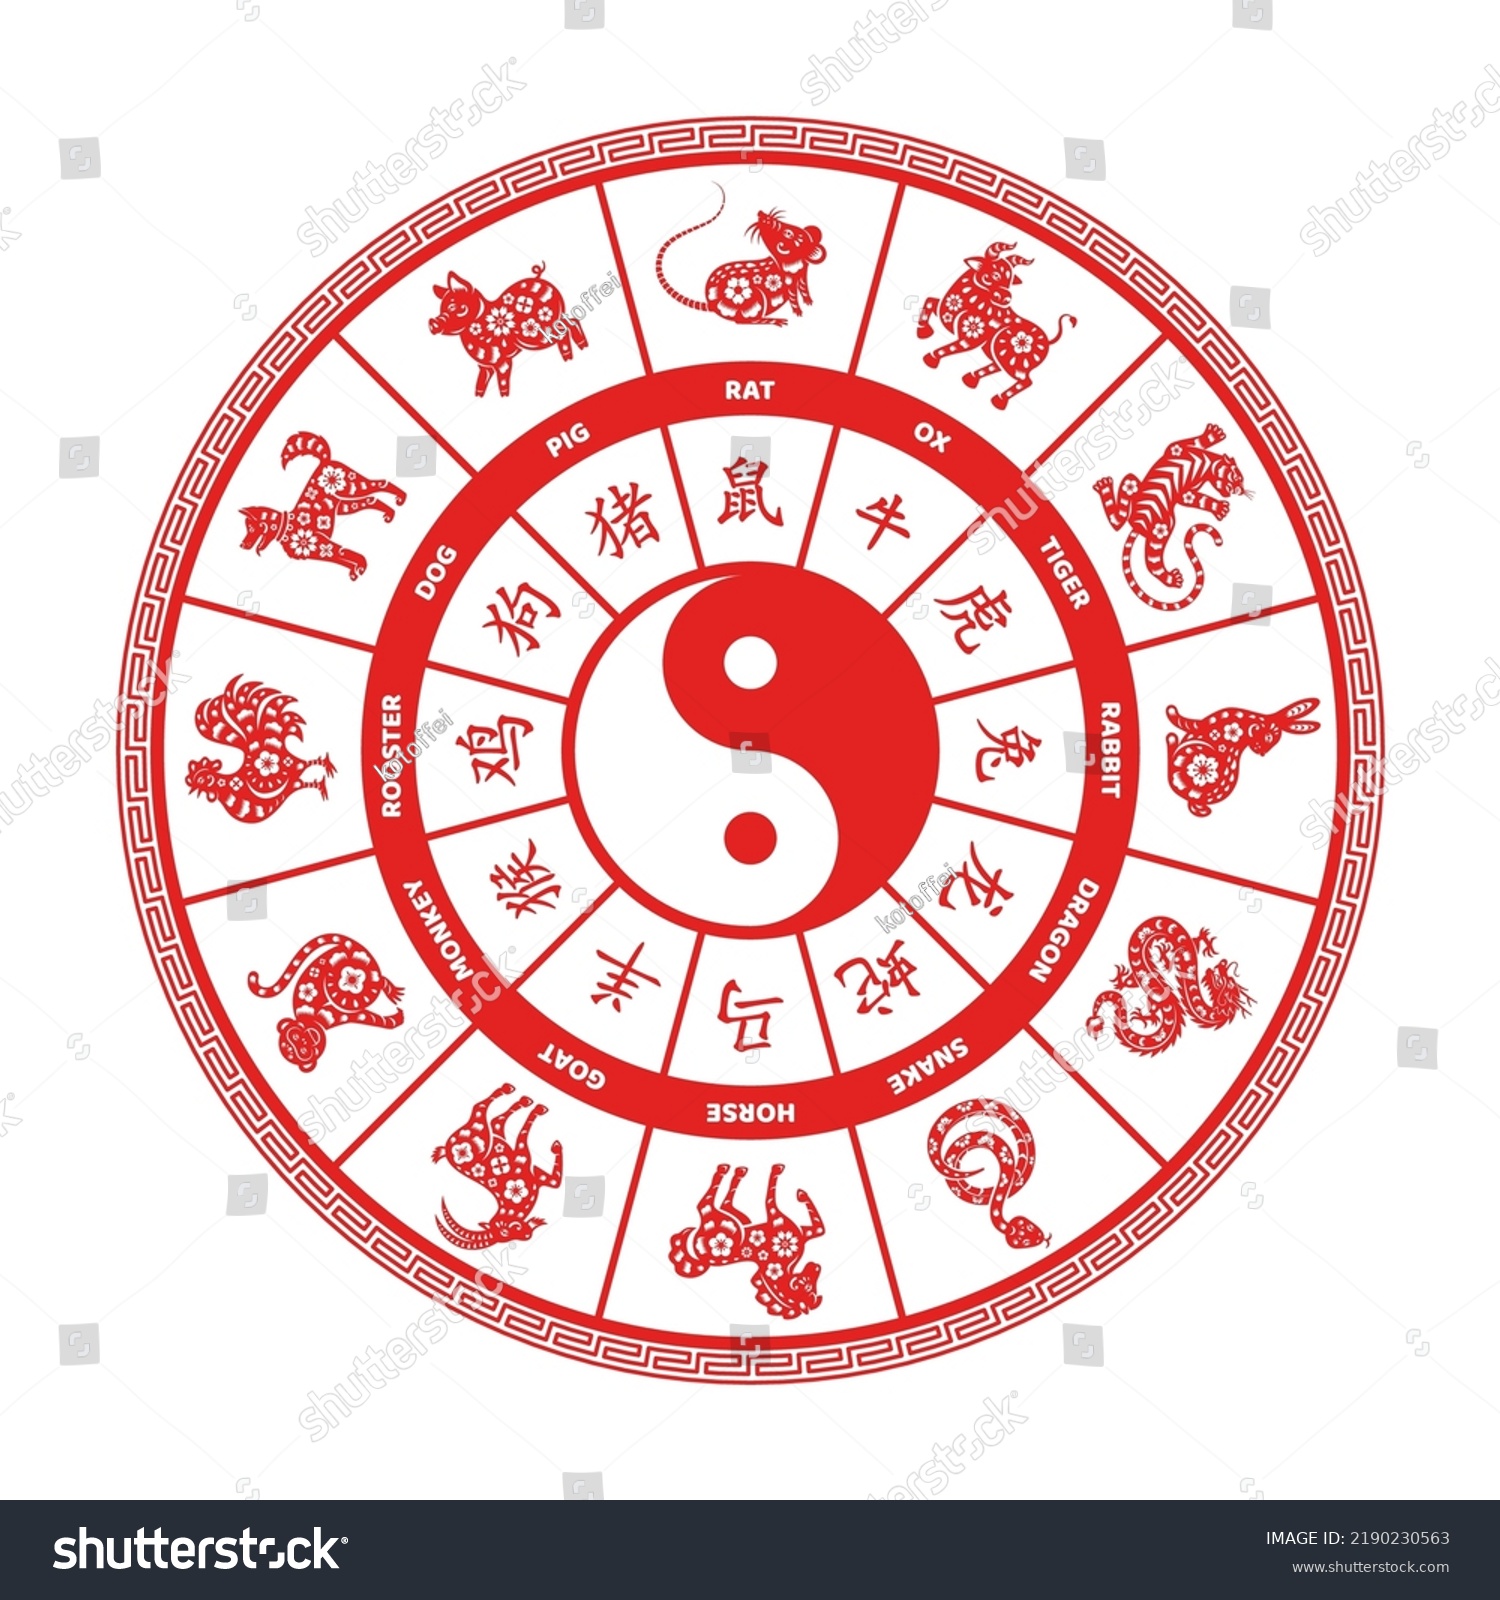 SVG of Chinese zodiac wheel with twelve animals and hieroglyphs isolated on white background. Vector illustration. Нin yang duality symbol. China characters letters with translation. svg